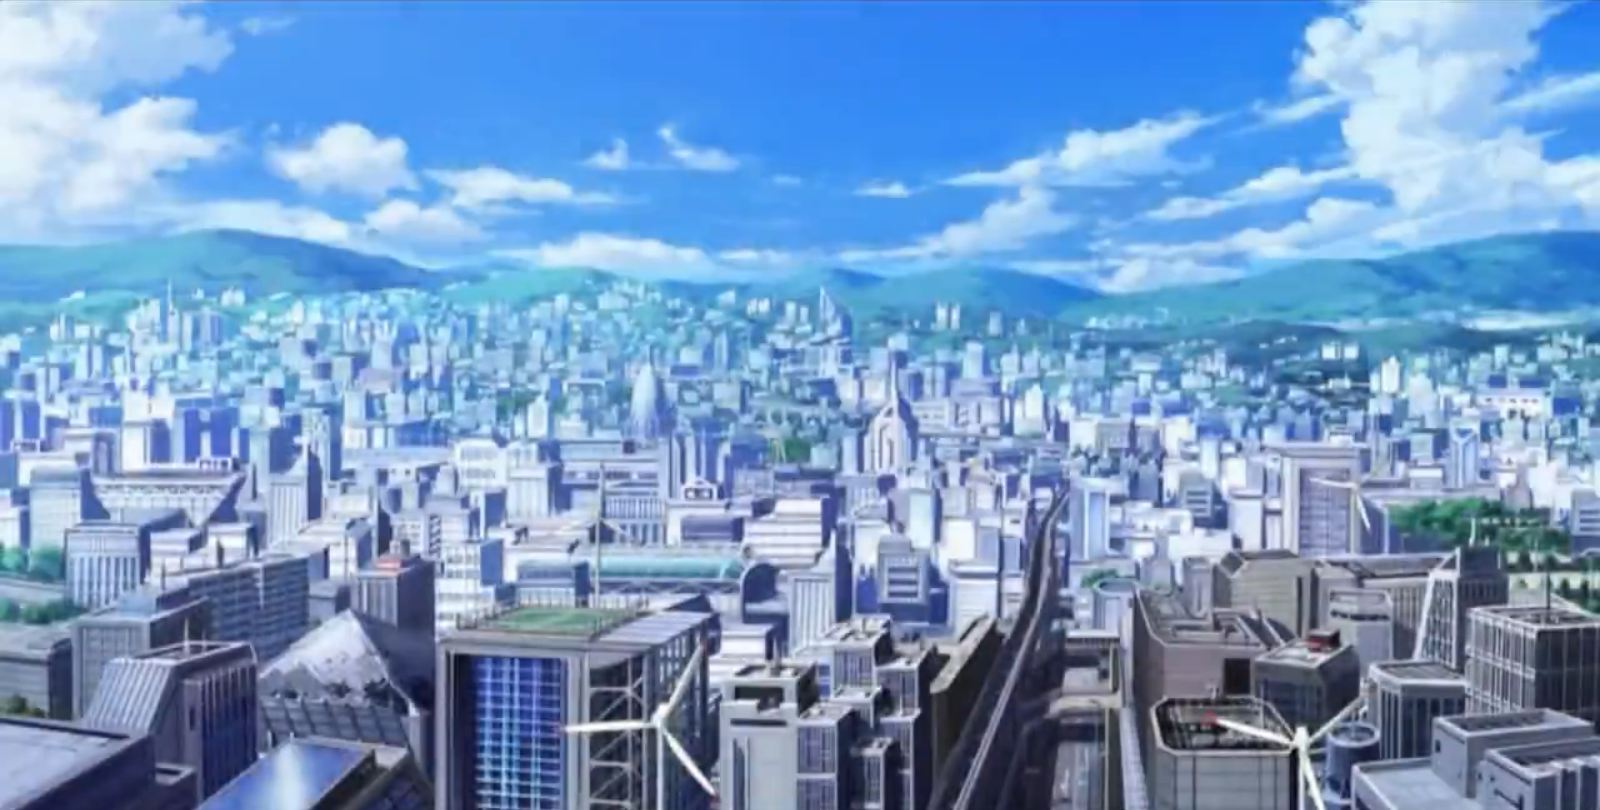 Textures, Skyscrapers, and Urban Landscapes: When Anime Meets Architecture  | ArchDaily